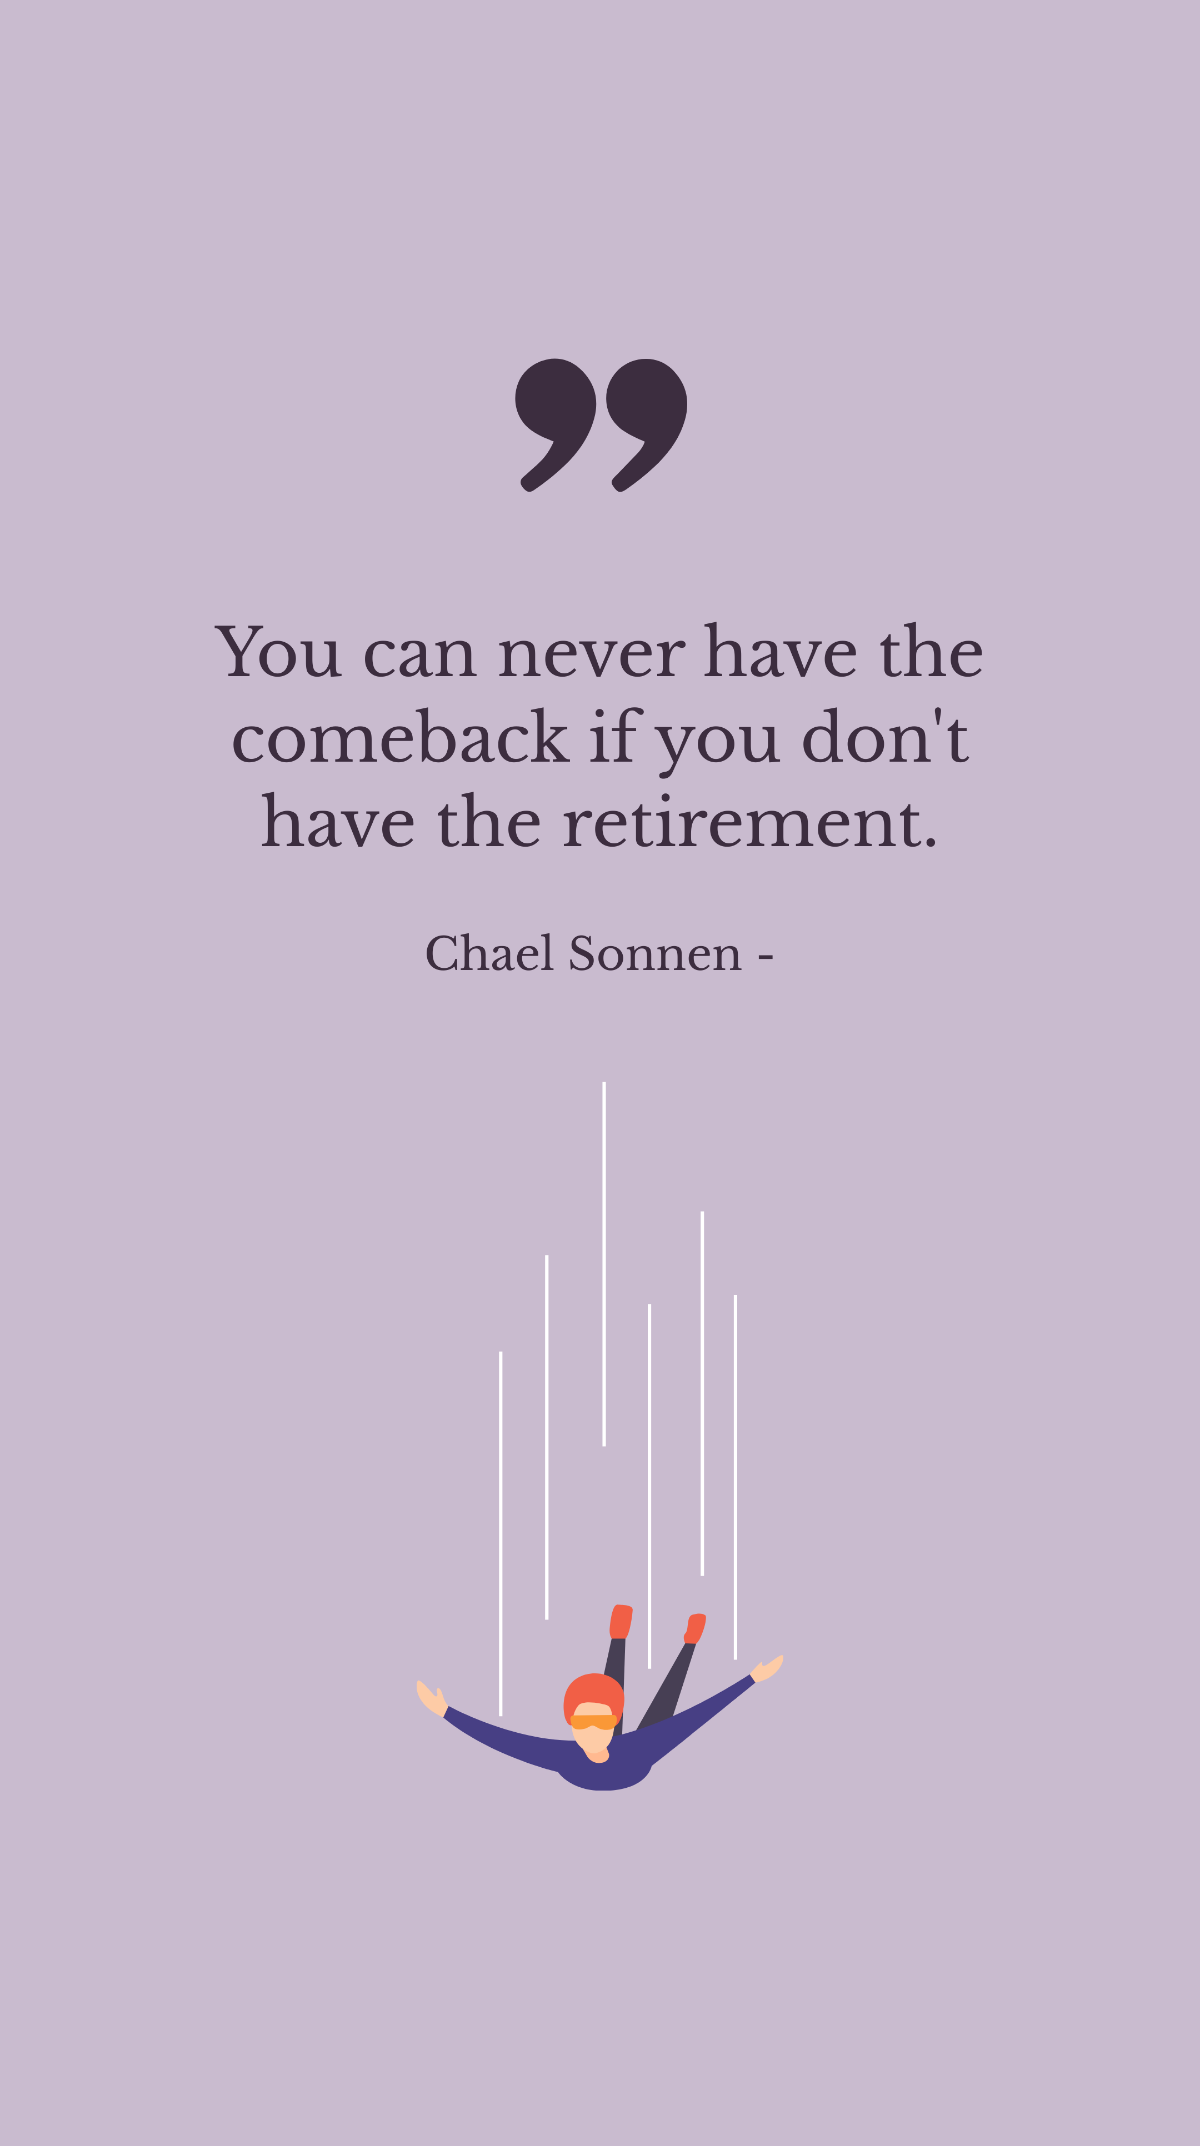 Chael Sonnen - You can never have the comeback if you don't have the retirement.